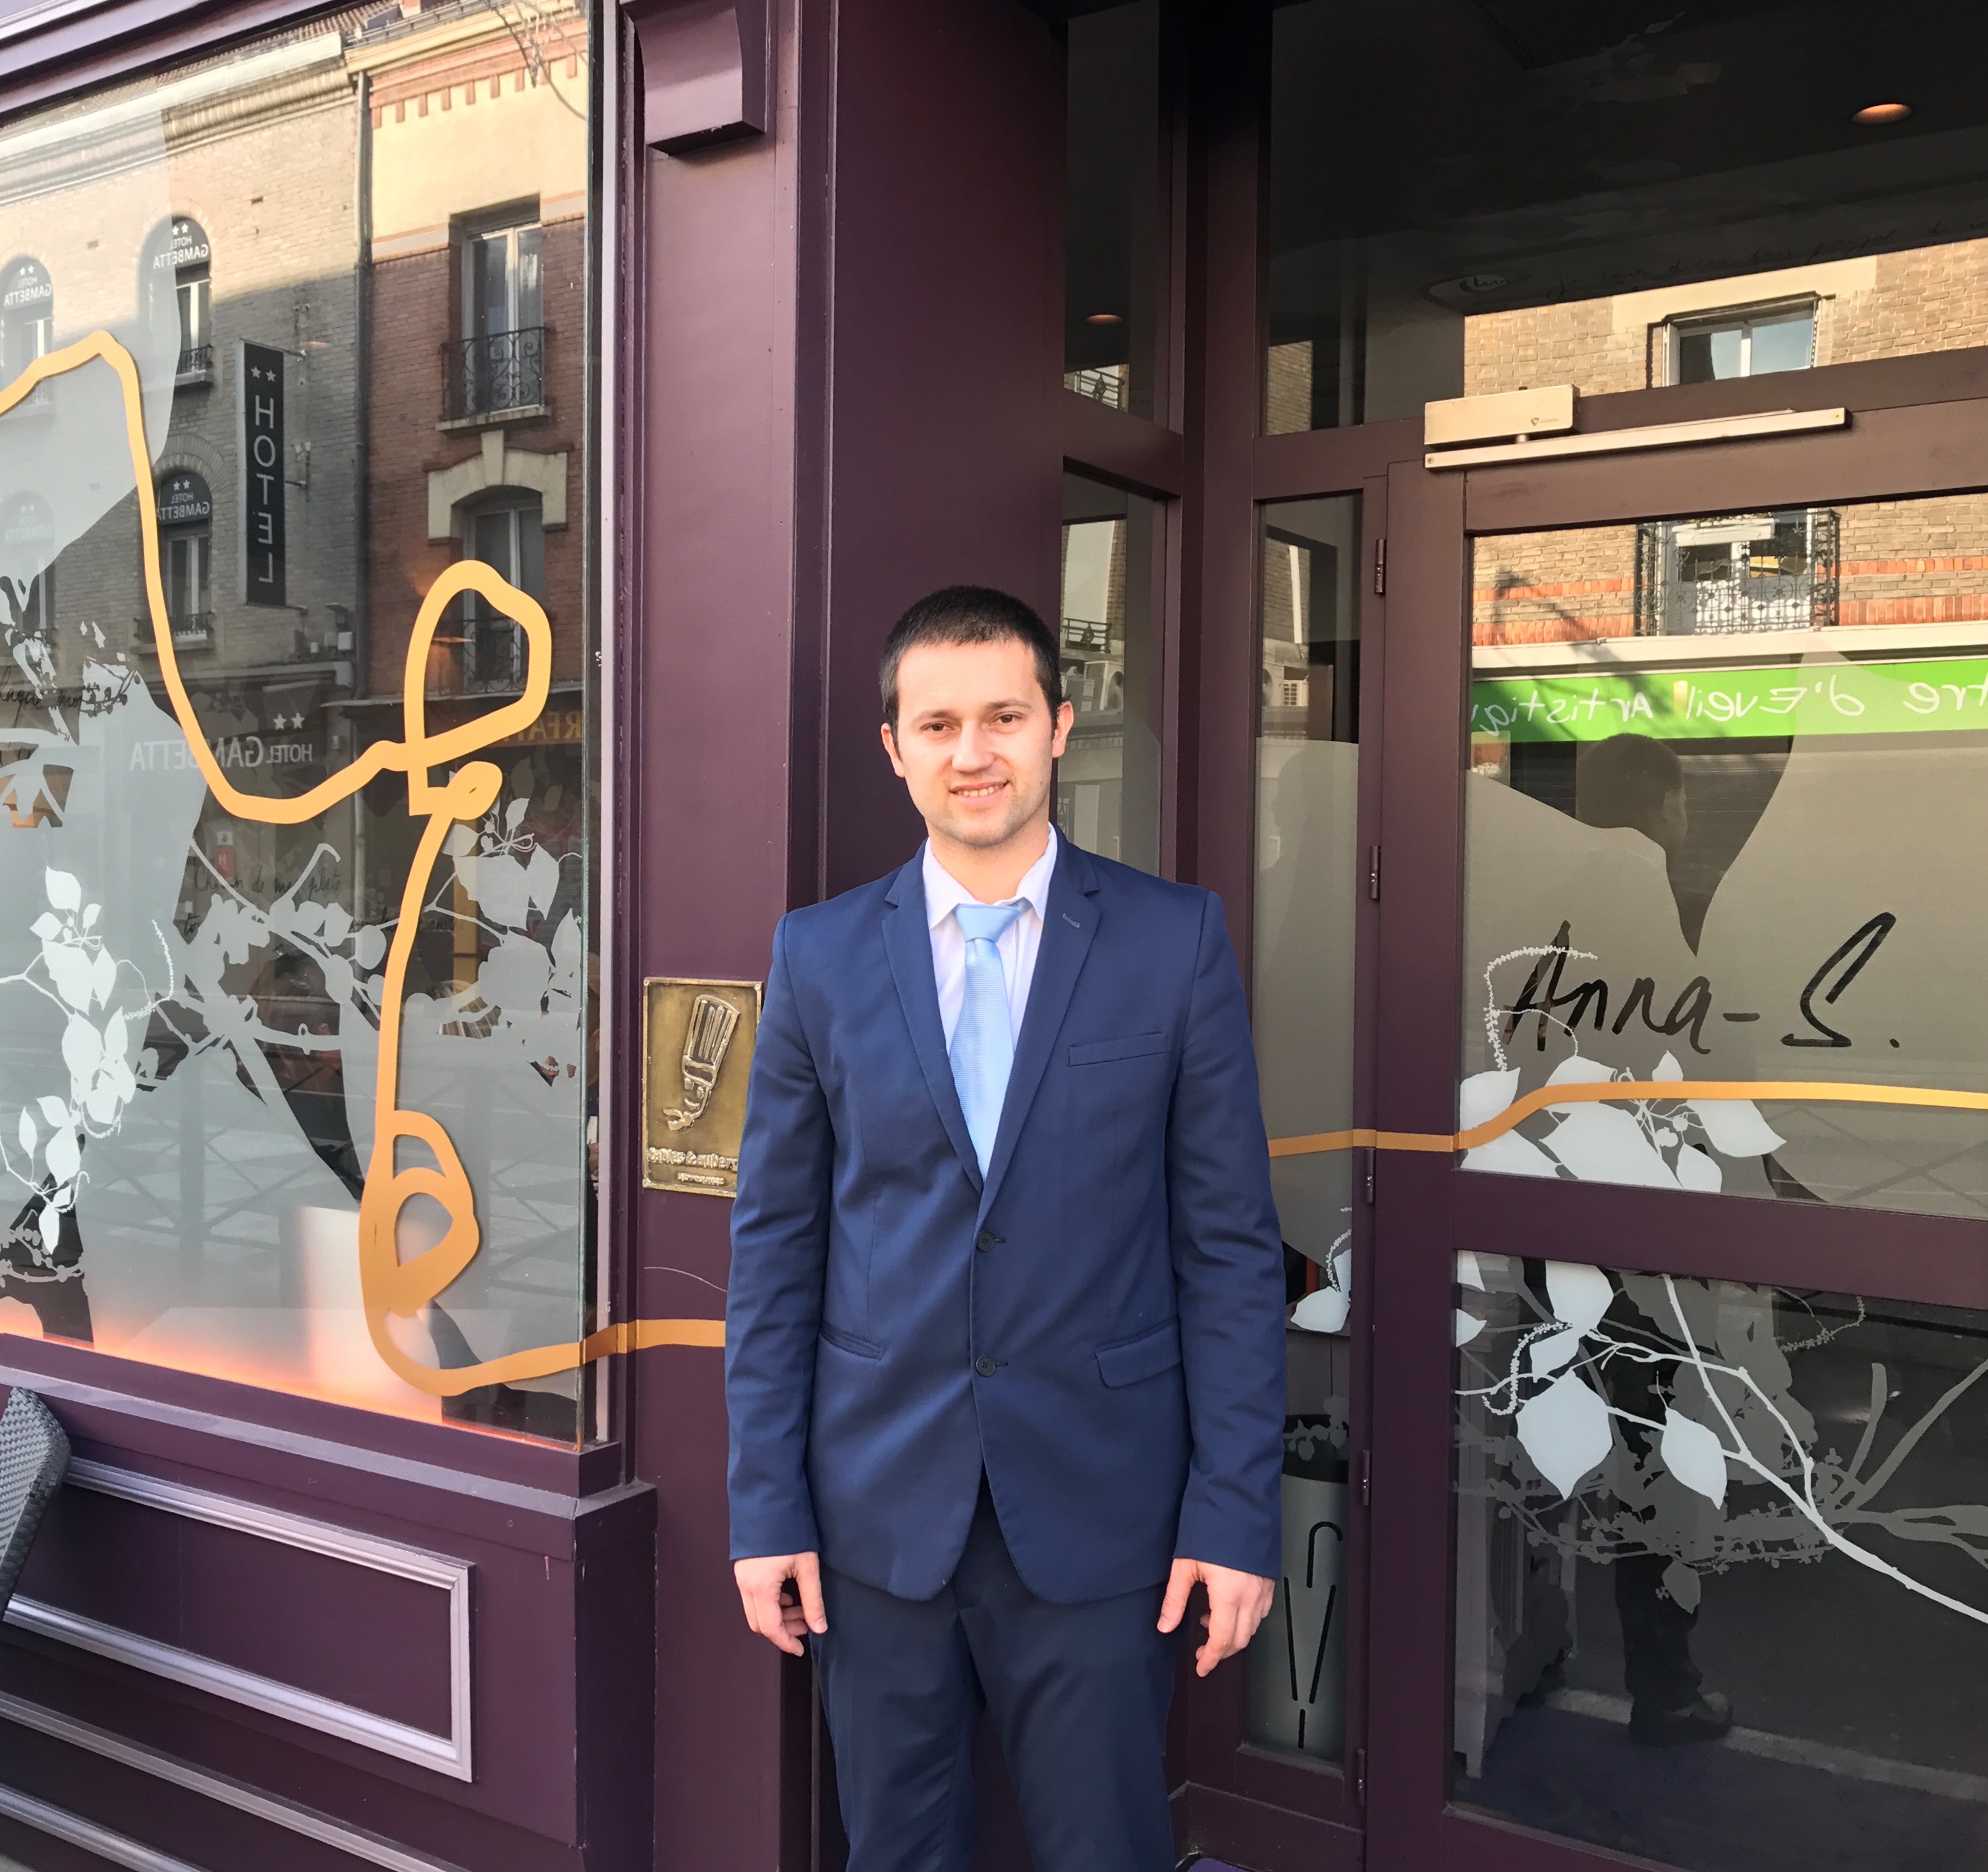 Cédric Roger, co-owner of Anna-S. La Table Amoureuse, greets diners at the door.